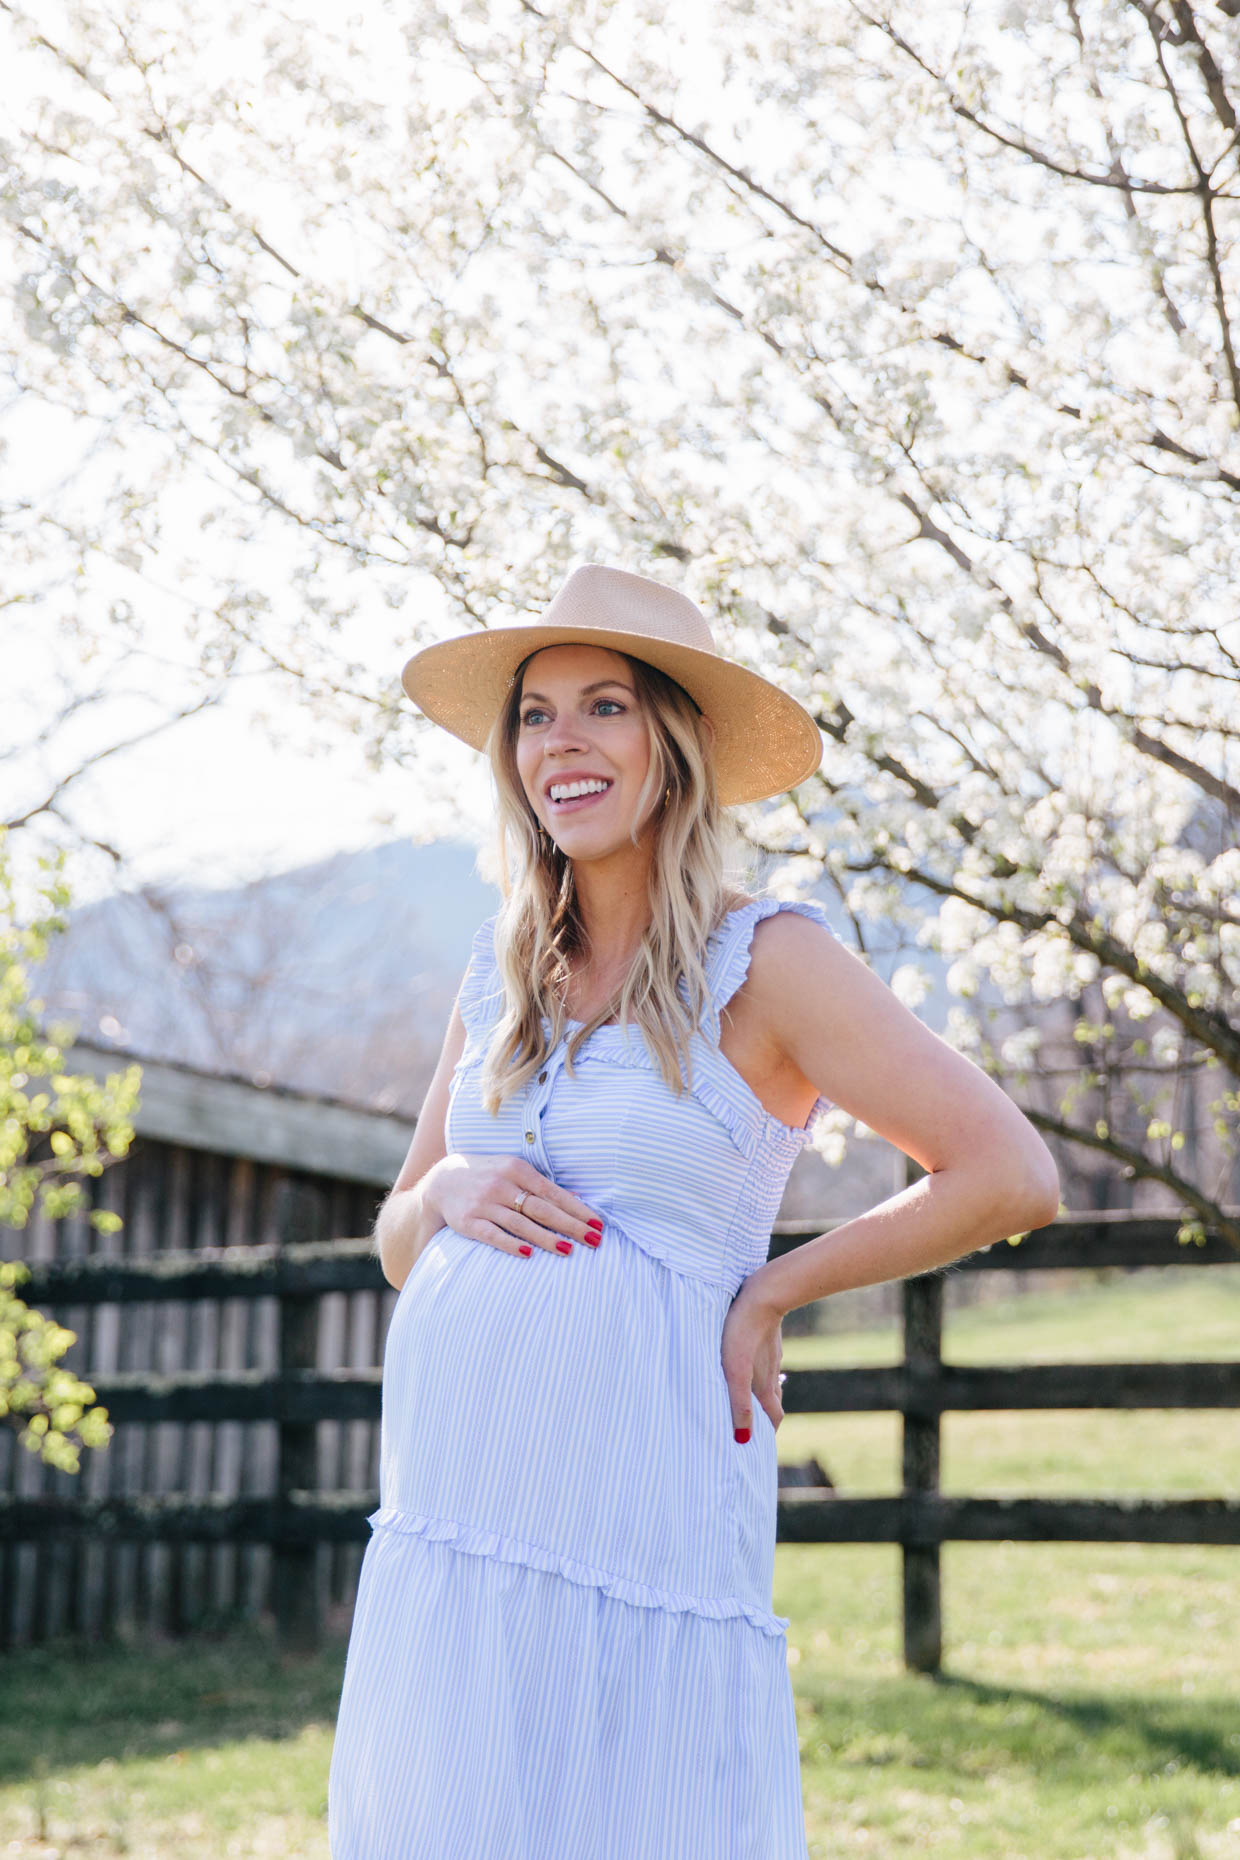 Spring Blooms & A New Sustainable Maternity Brand I'm Loving - Meagan's ...